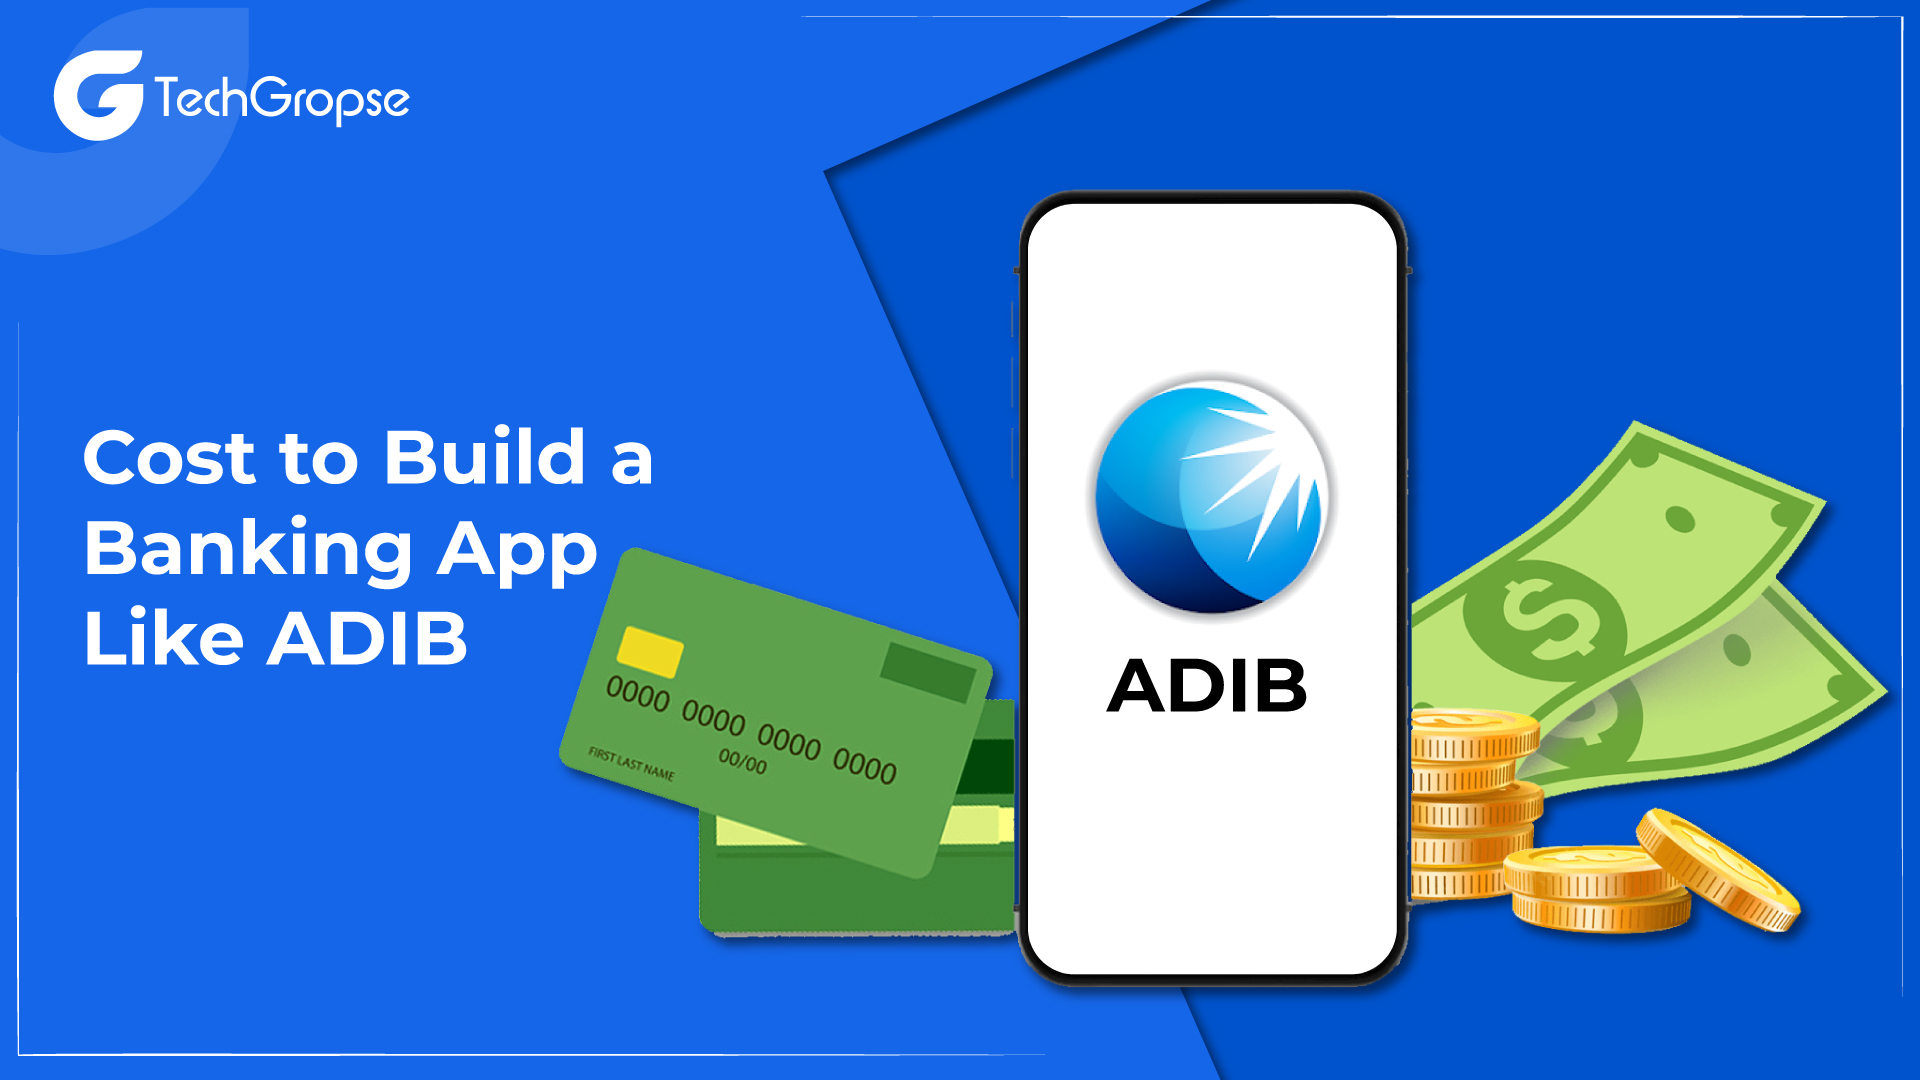 Cost to Build a Banking App Like ADIB